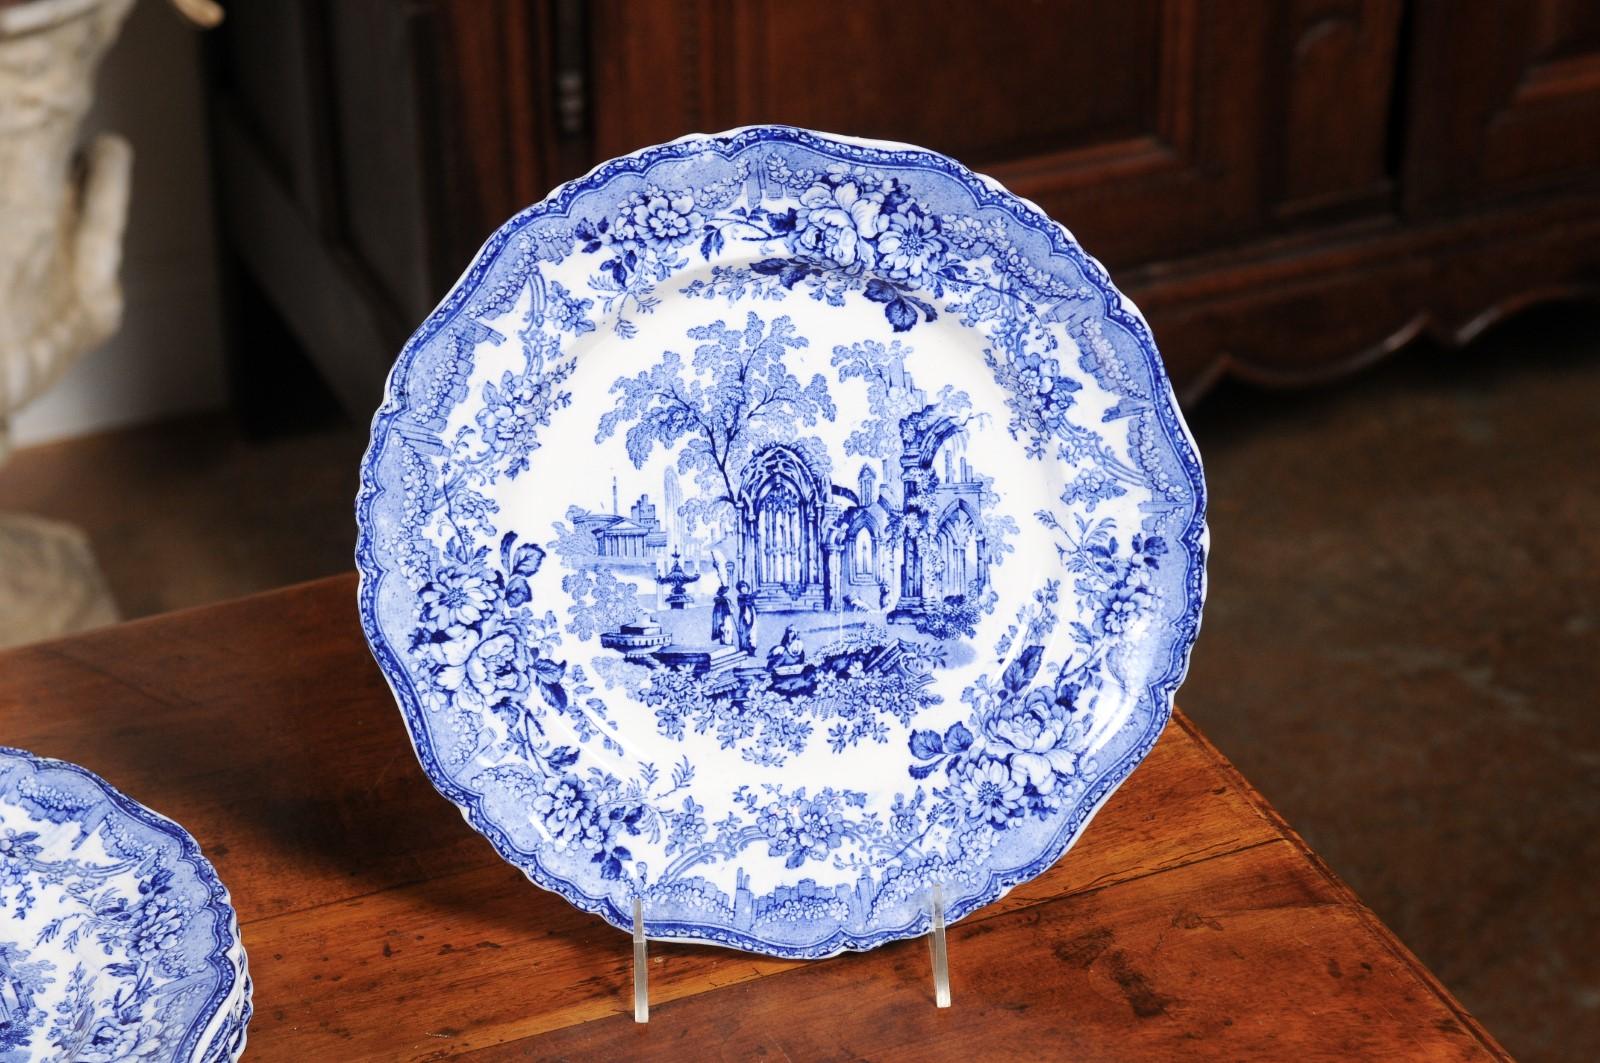 English Blue and White Transfer Plates with Gothic Ruins Motifs, 19th Century In Good Condition For Sale In Atlanta, GA